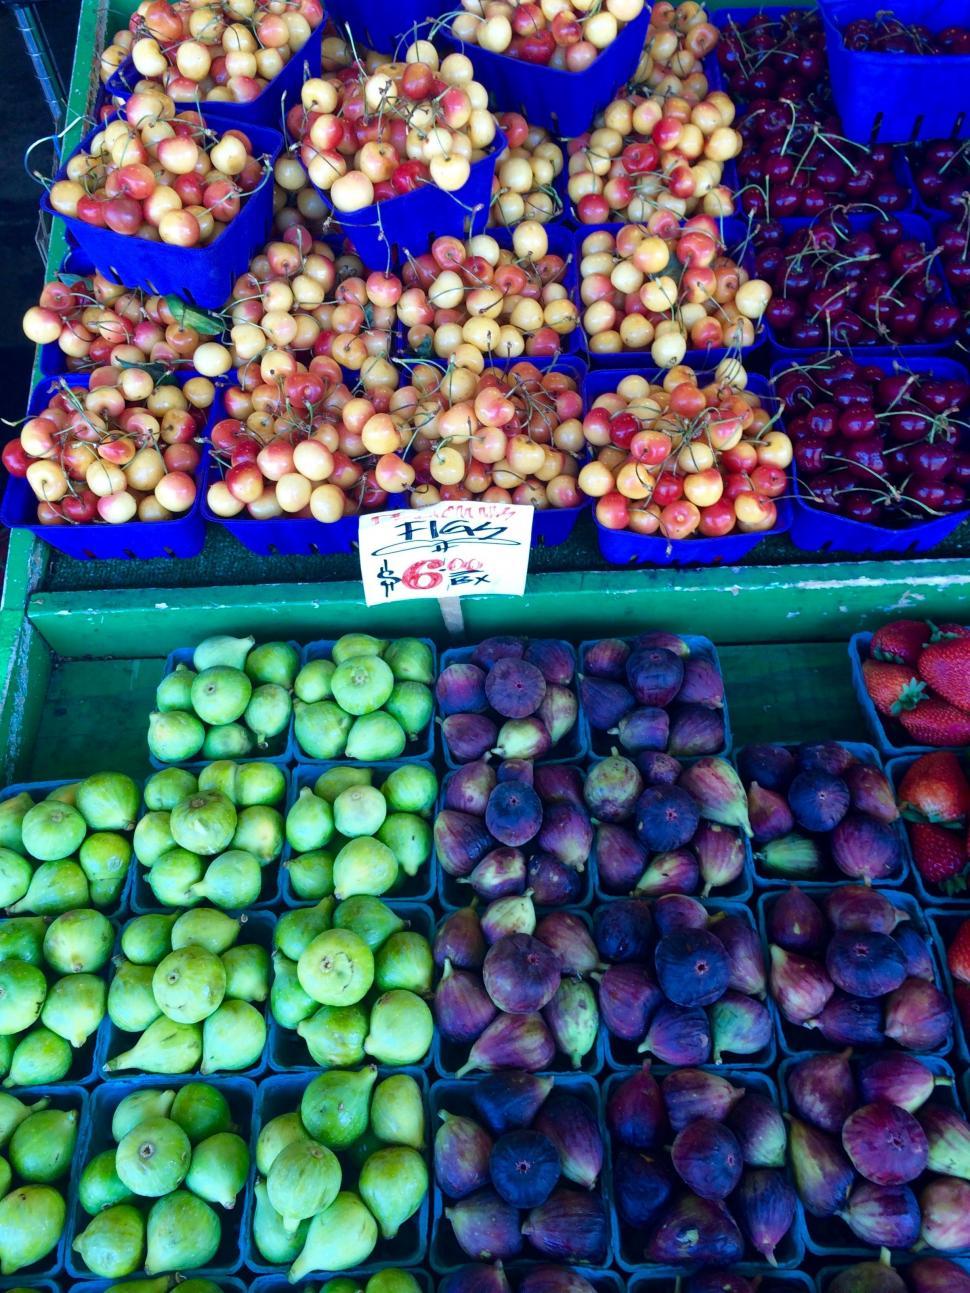 Free Image of Assorted Fruits Displayed at Market 